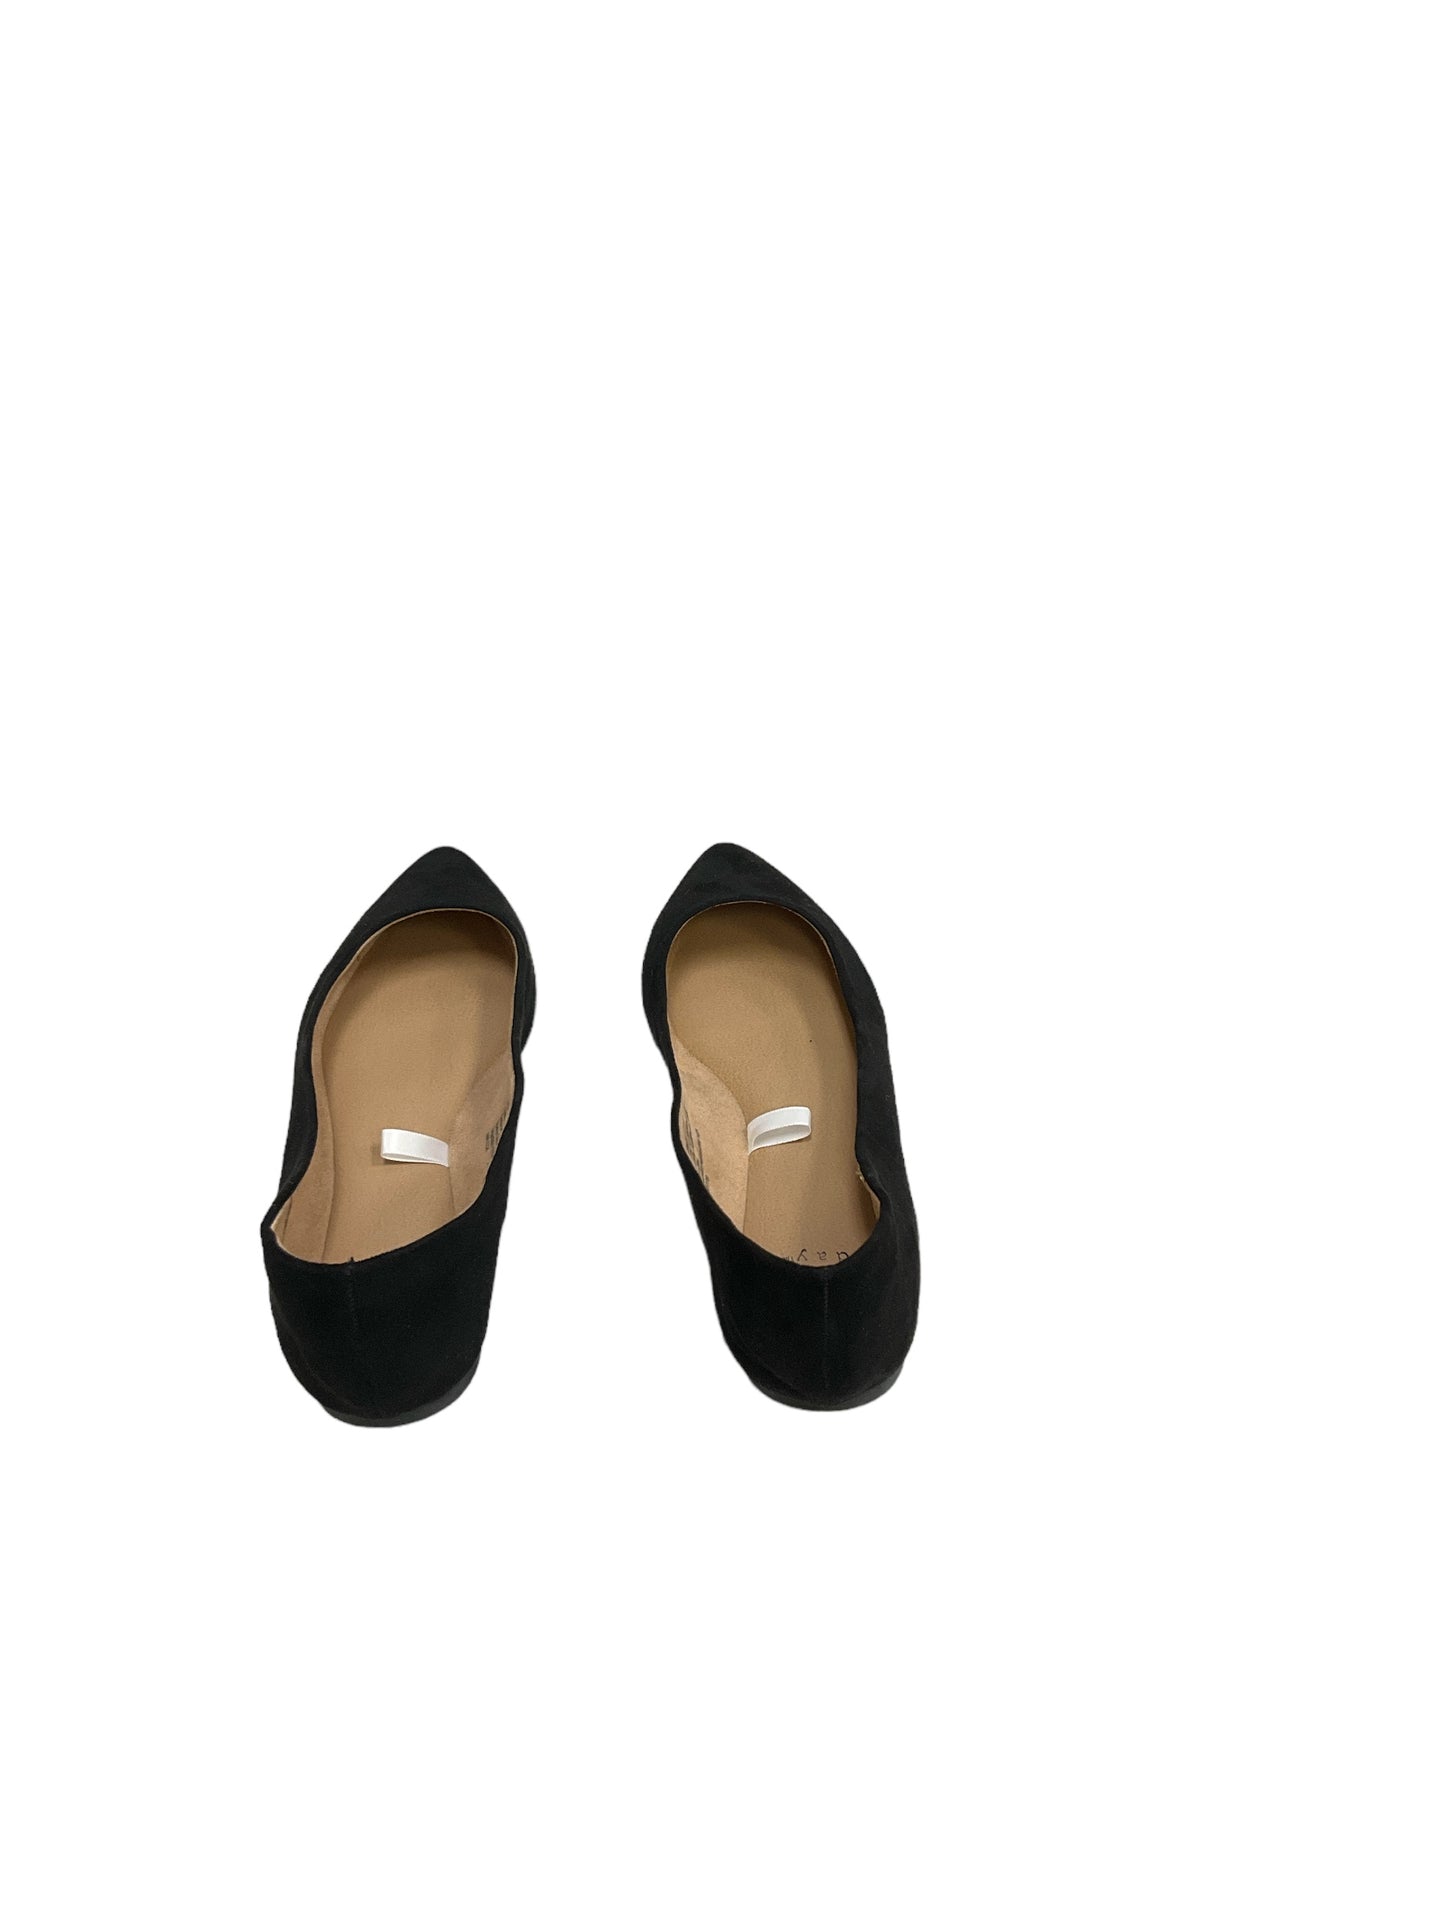 Shoes Flats Ballet By A New Day  Size: 8